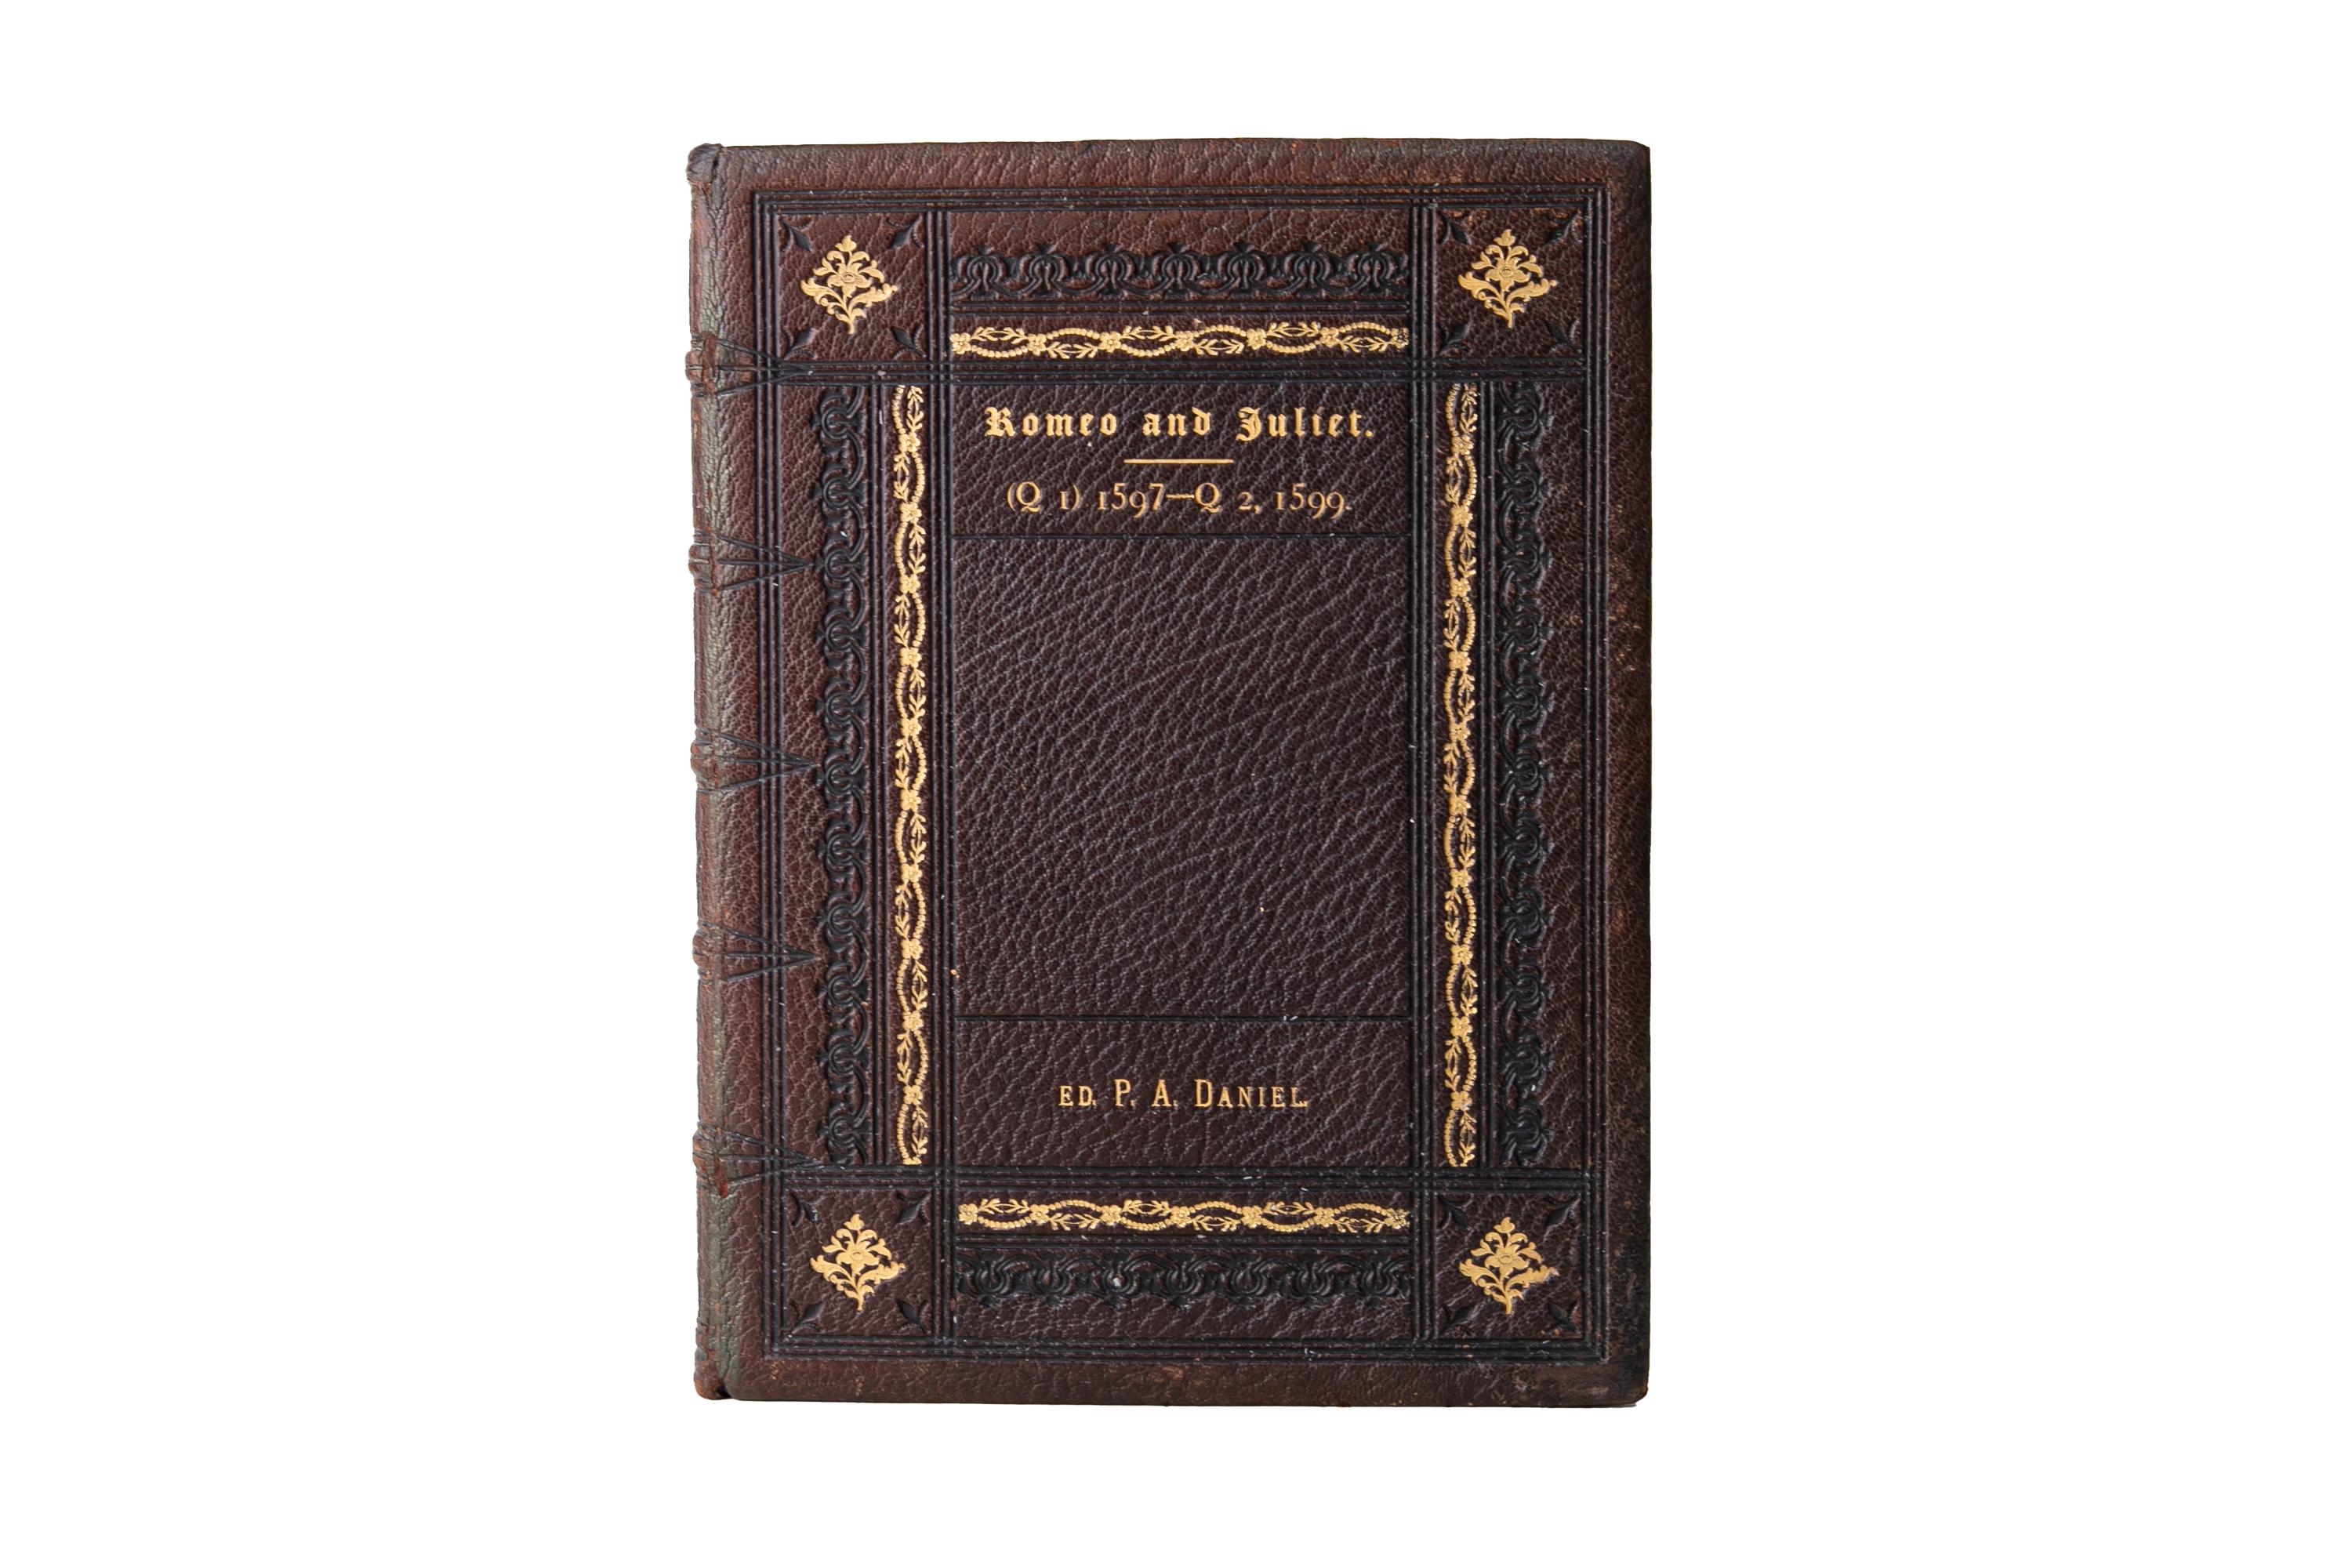 1 Volumes. William Shakespeare, Romeo & Juliet. Bound in full brown morocco with the covers and raised band spine displaying ornate gilt-tooled detailing. All edges gilt with gilt-tooled dentelles and marbled endpapers. Parallel texts on the first